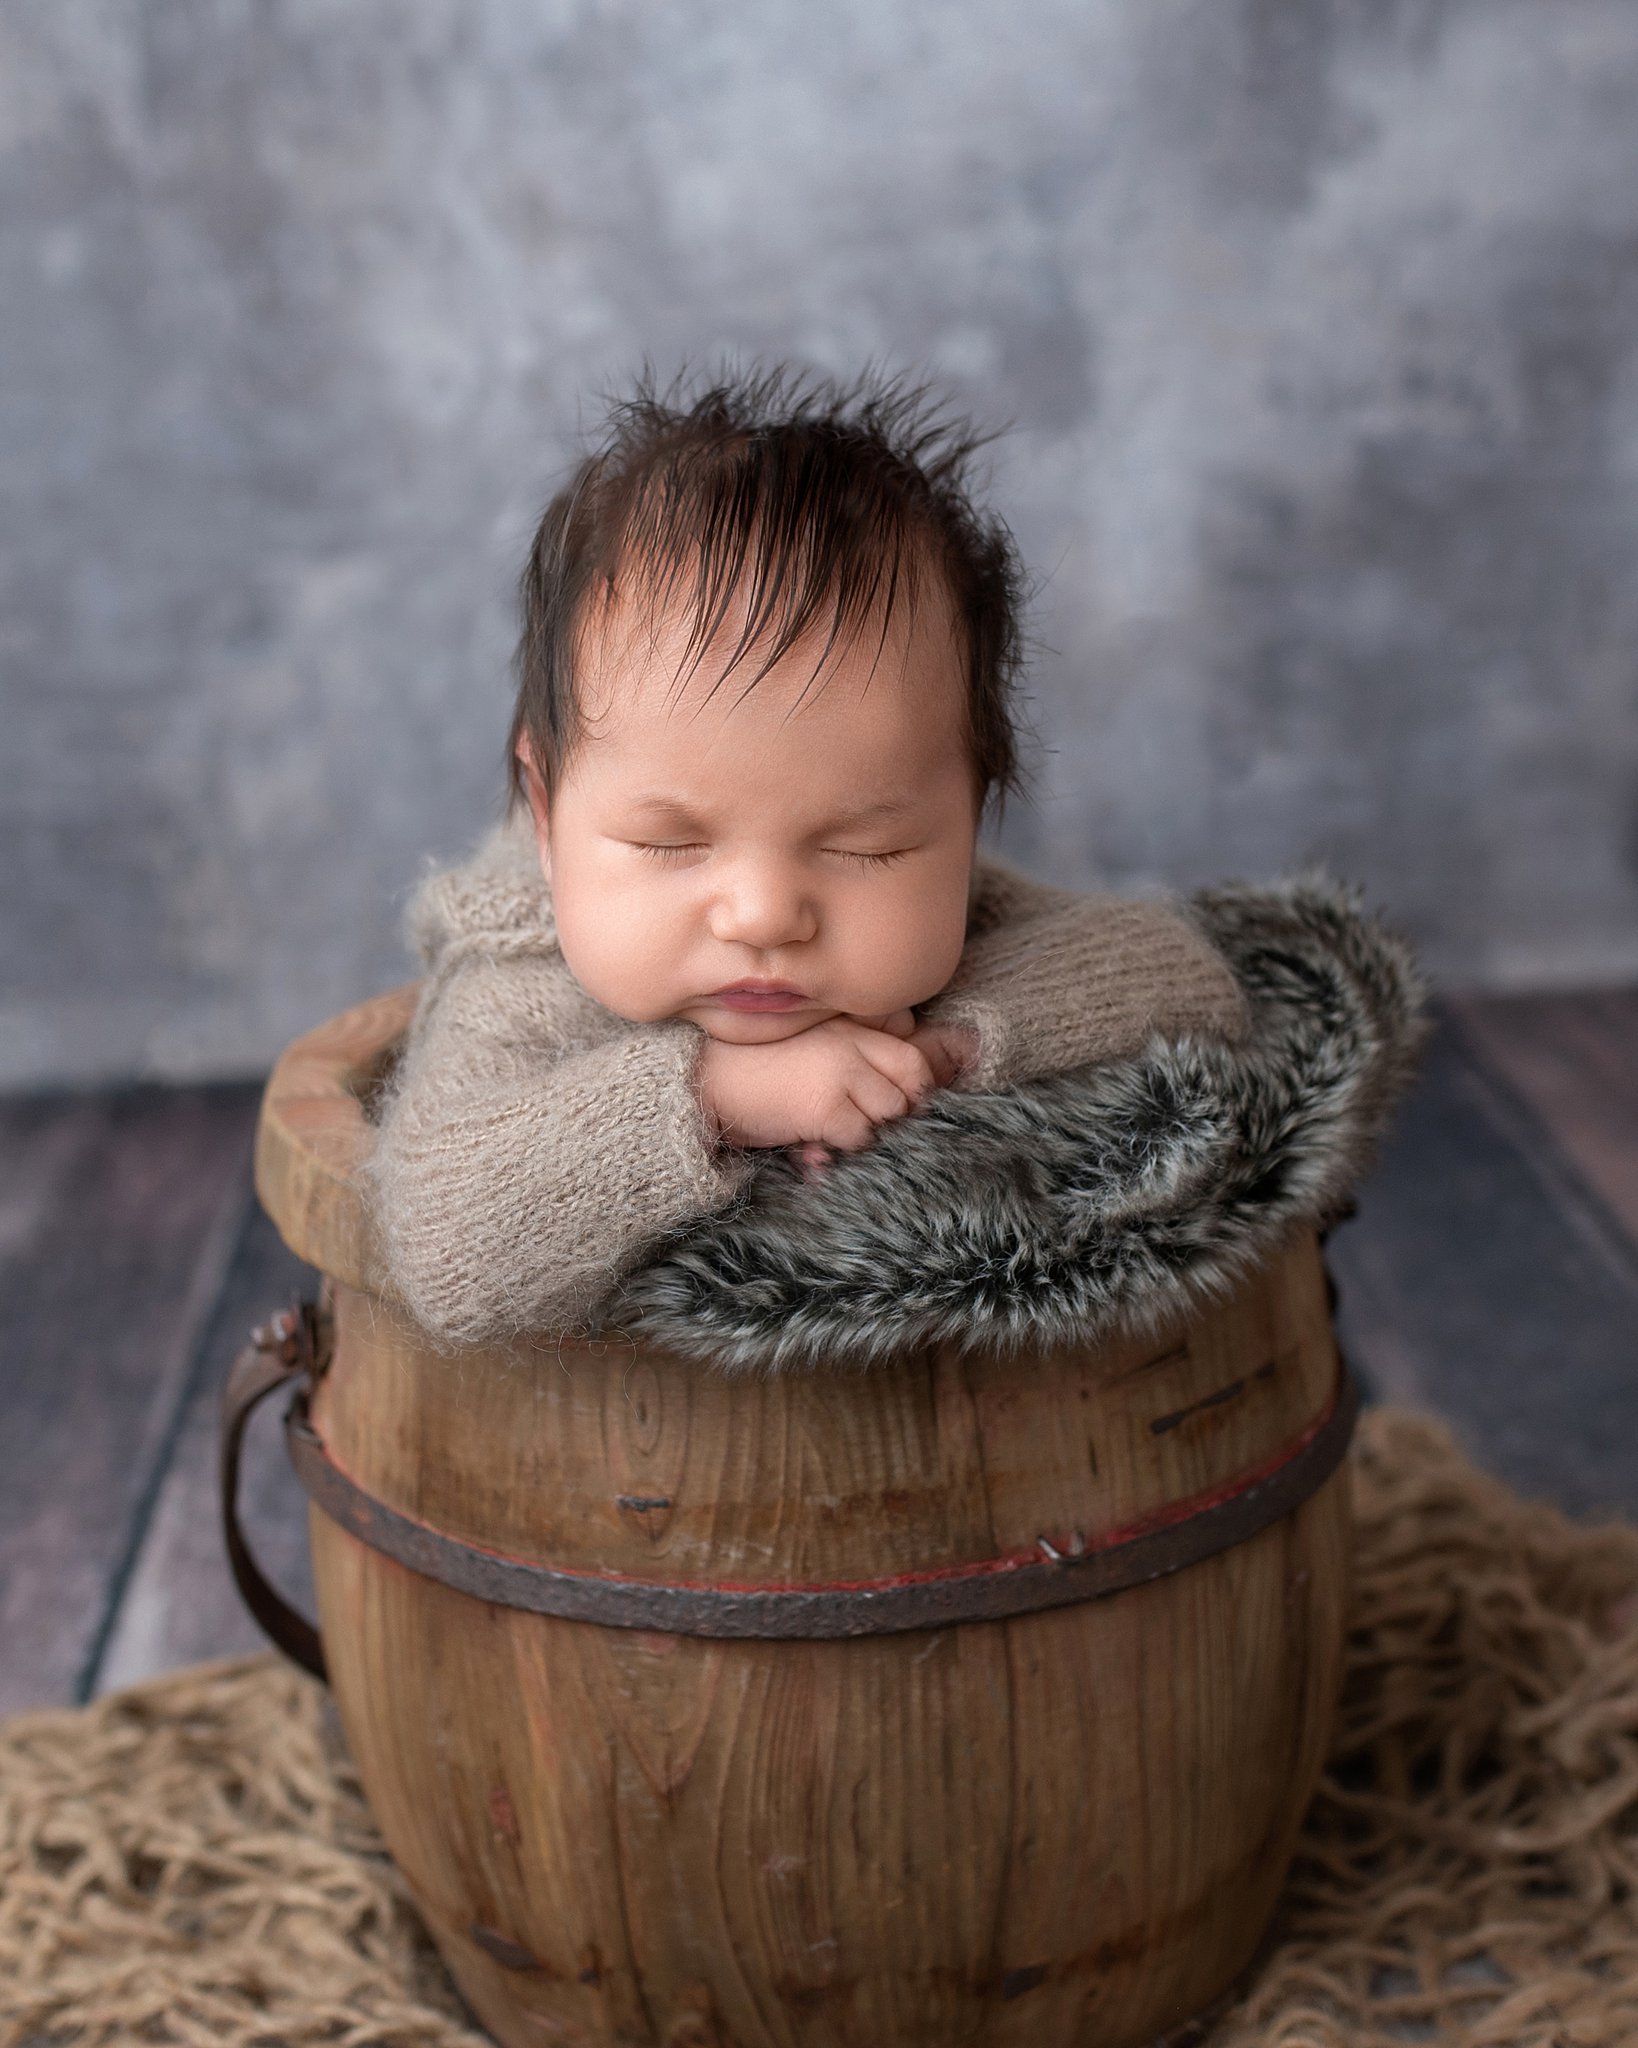 a newborn baby sleeps in a wooden bucket leaning on it's hands baby furniture stores in Houston